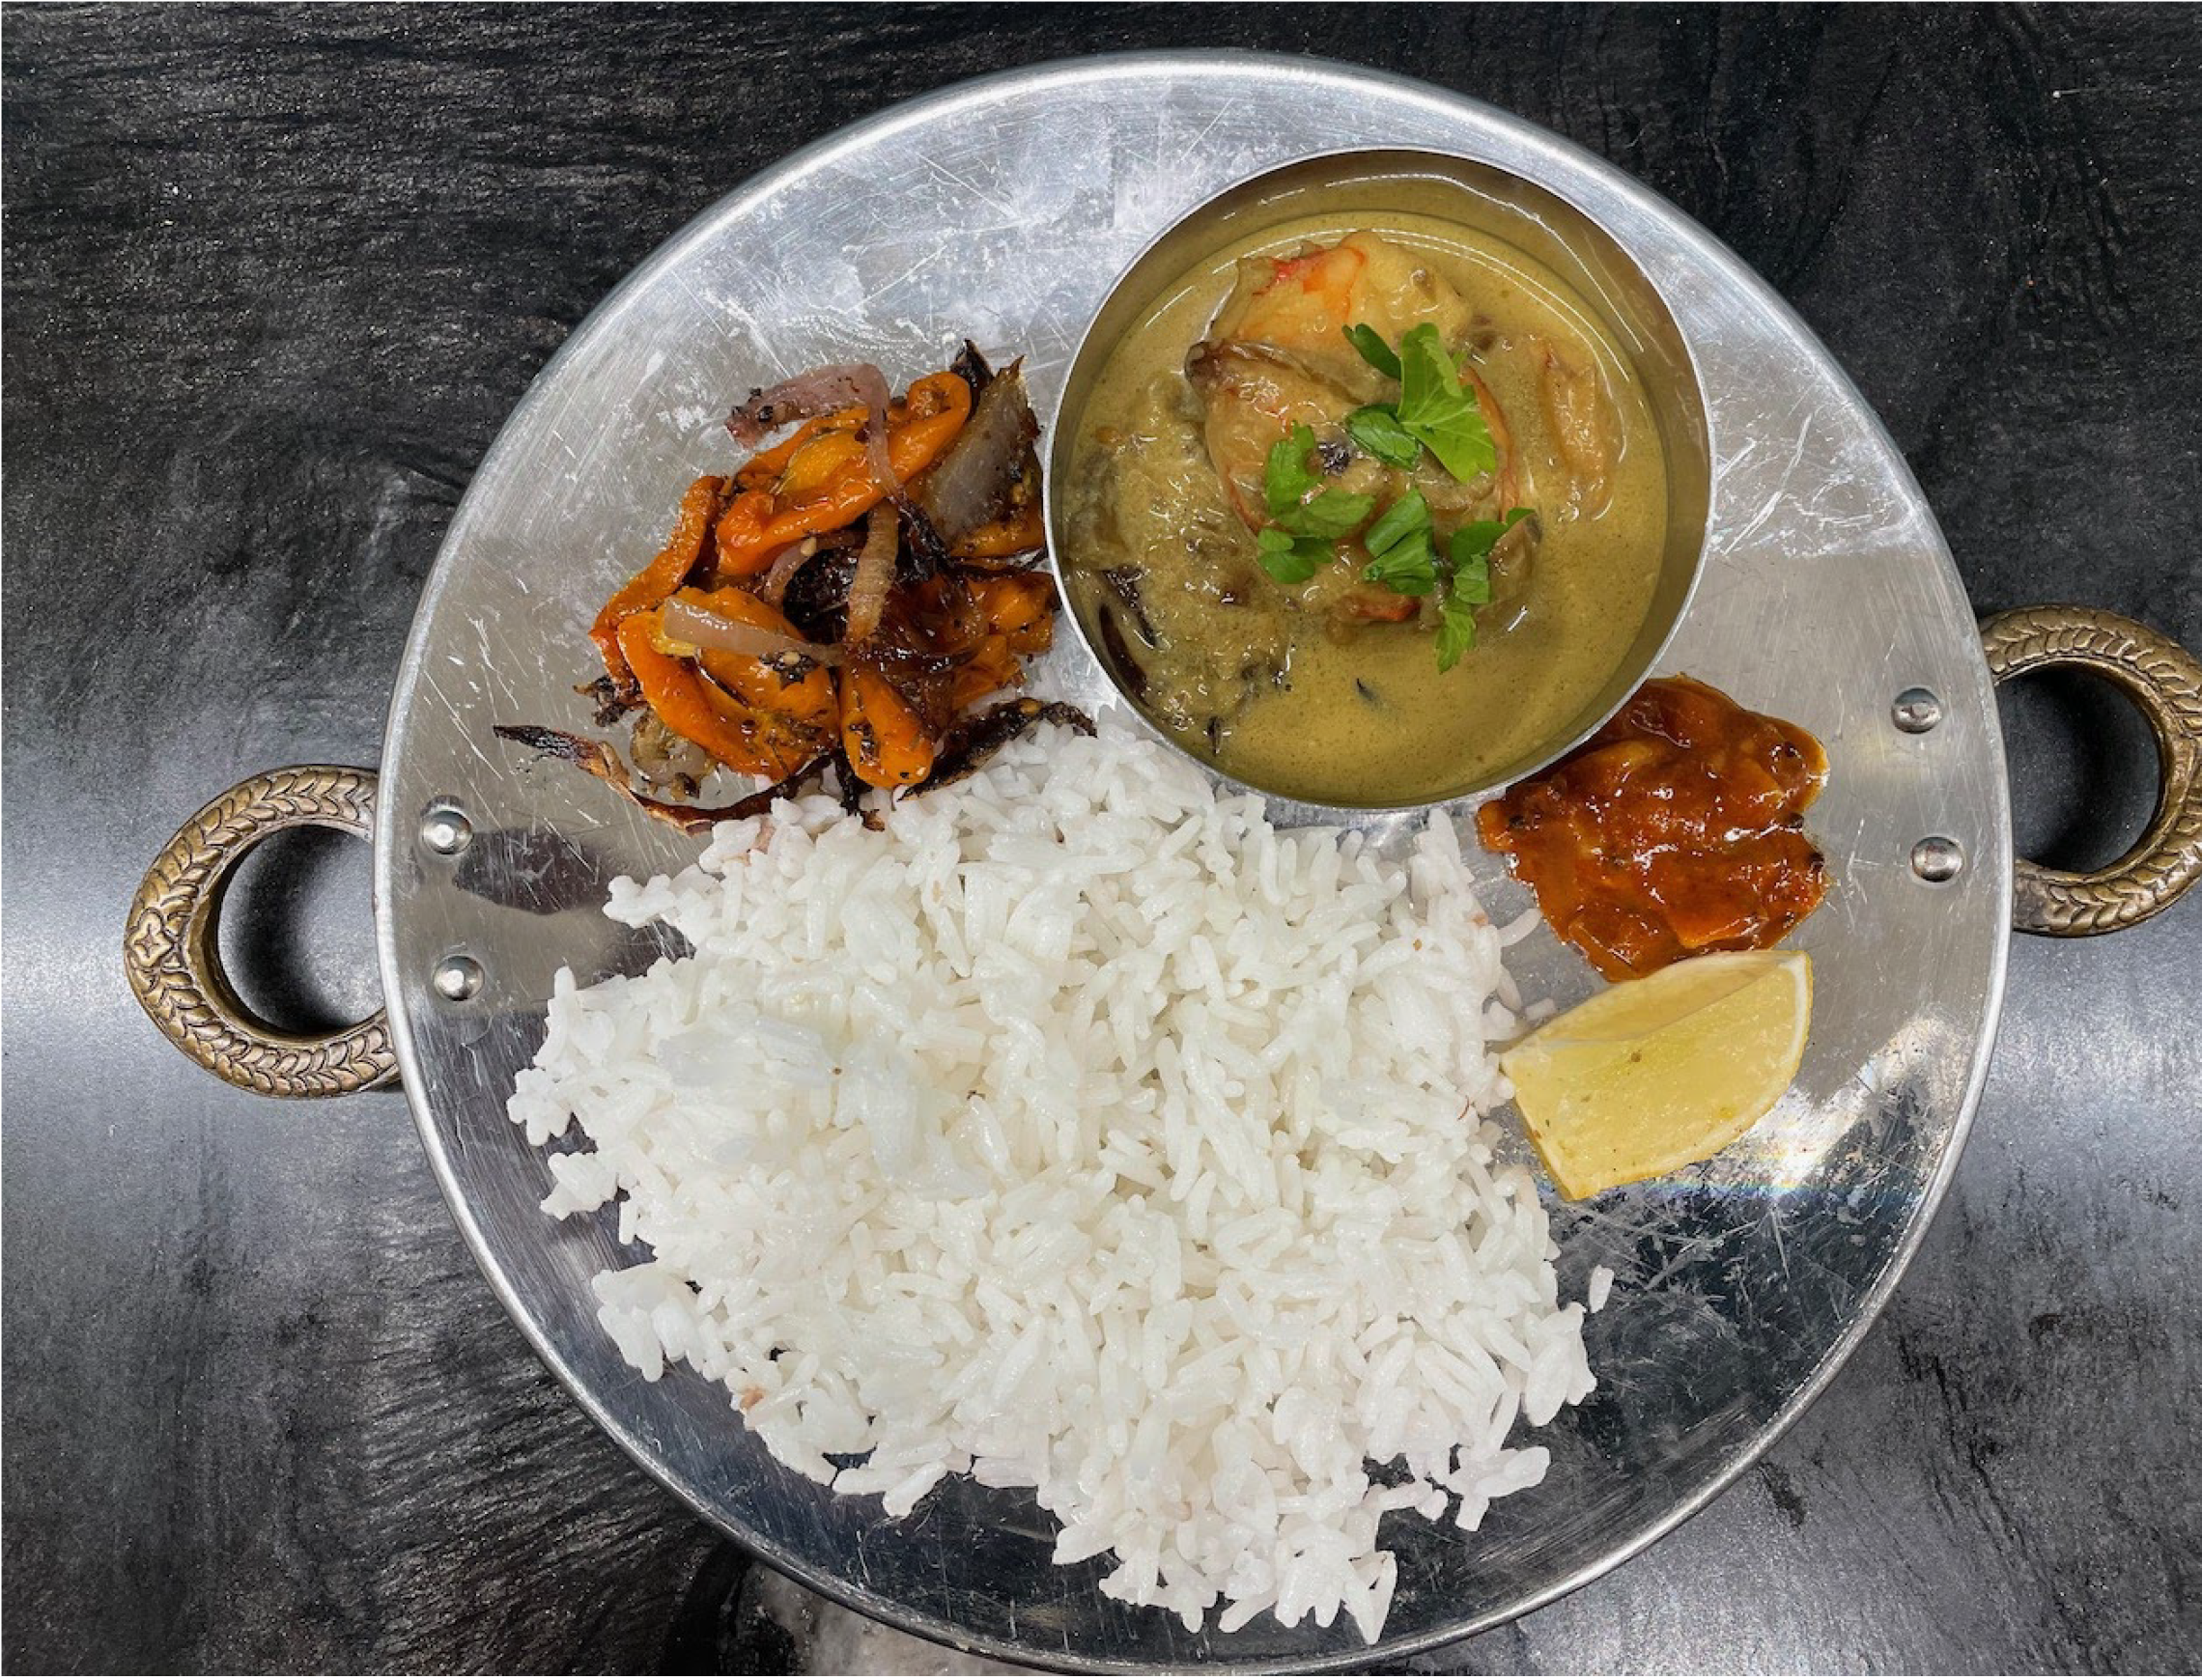 Indian cooking